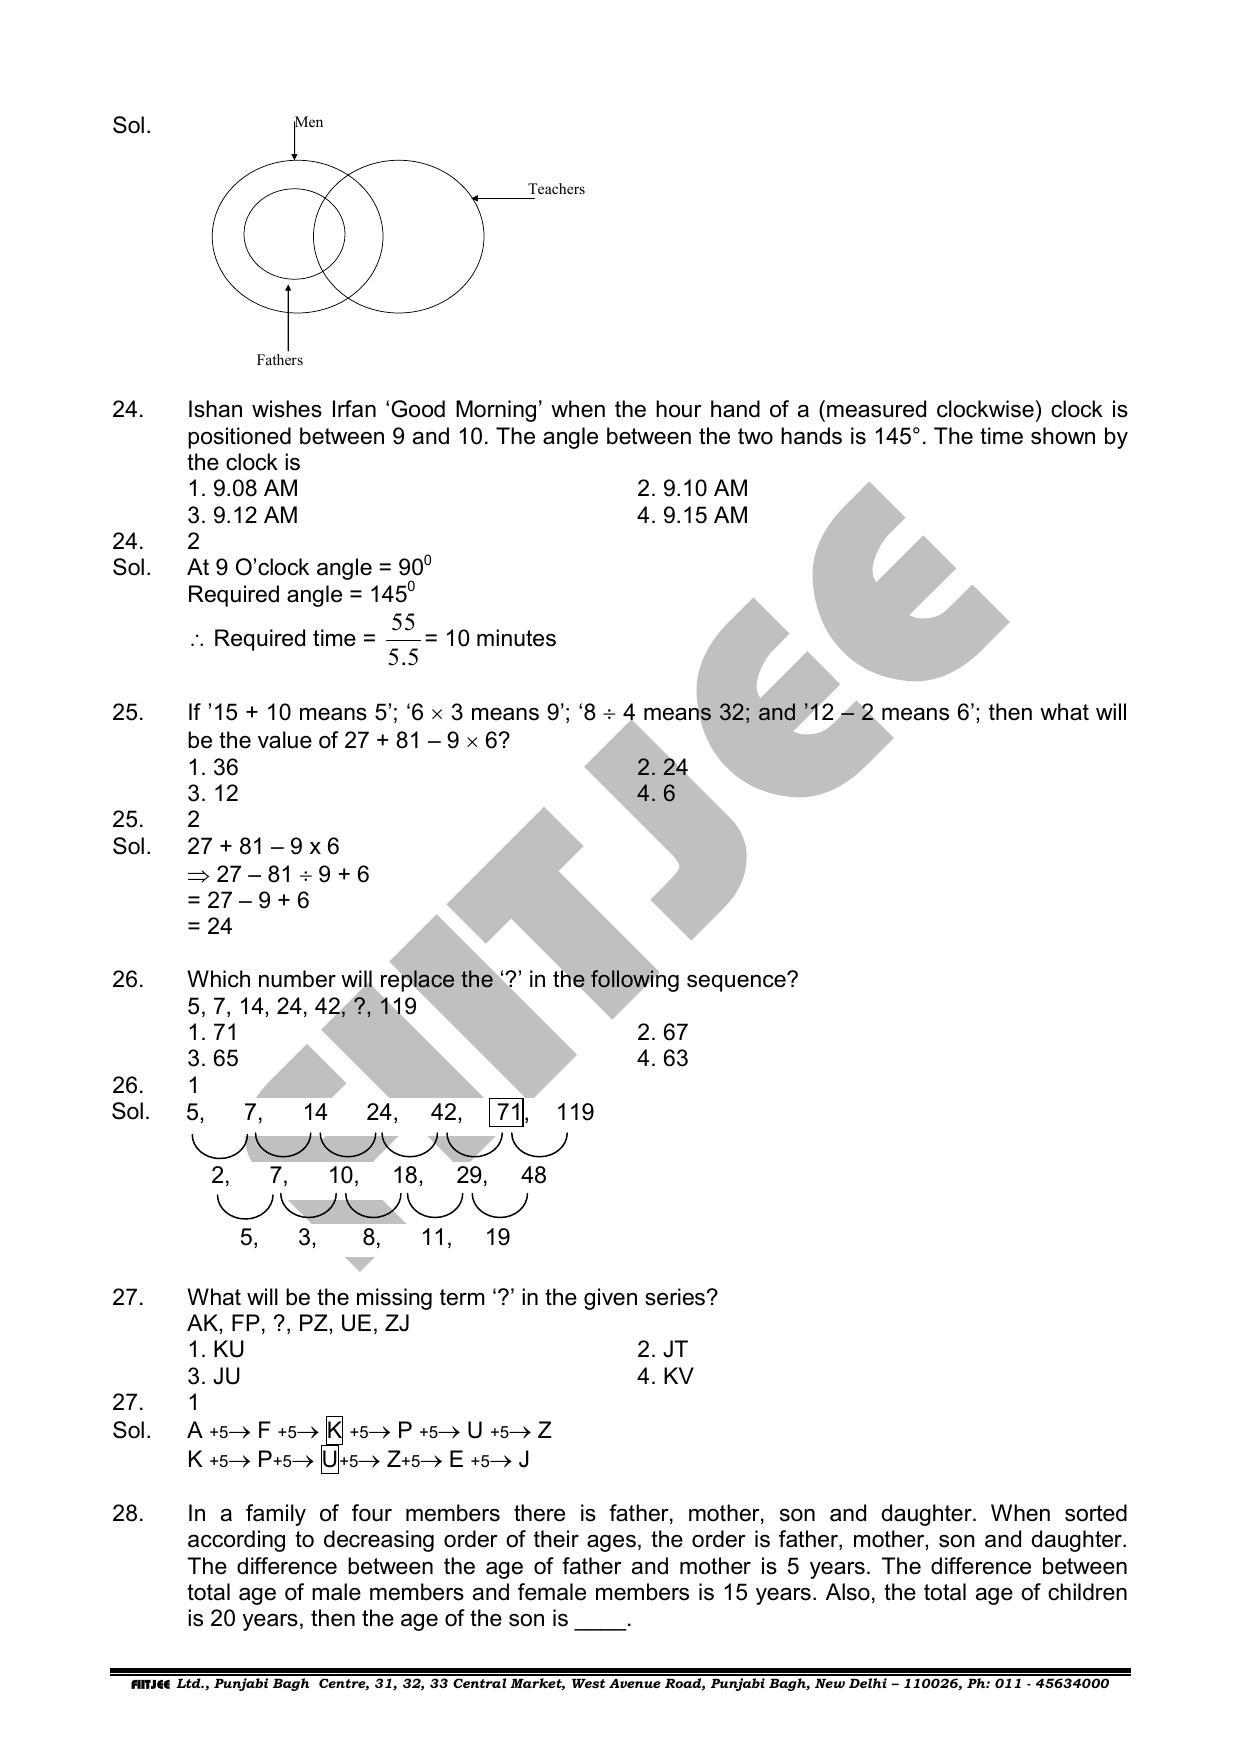 NTSE 2019 (Stage II) MAT Question Paper with Solution (June 16, 2019) - Page 10